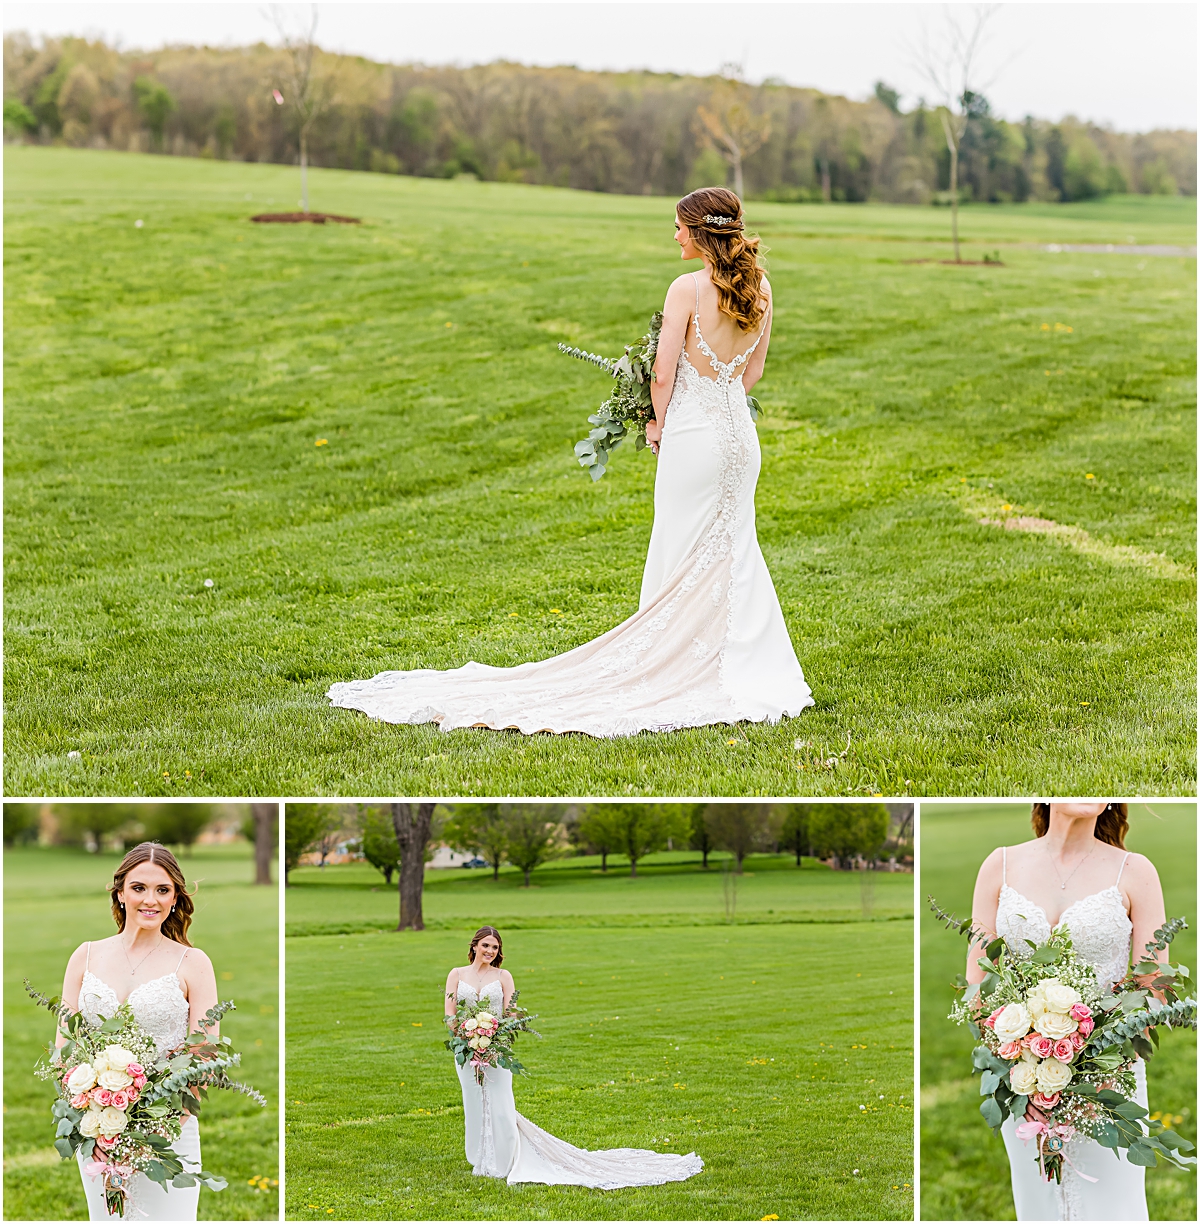 Collage of Ashleigh standing in a field in her wedding dress